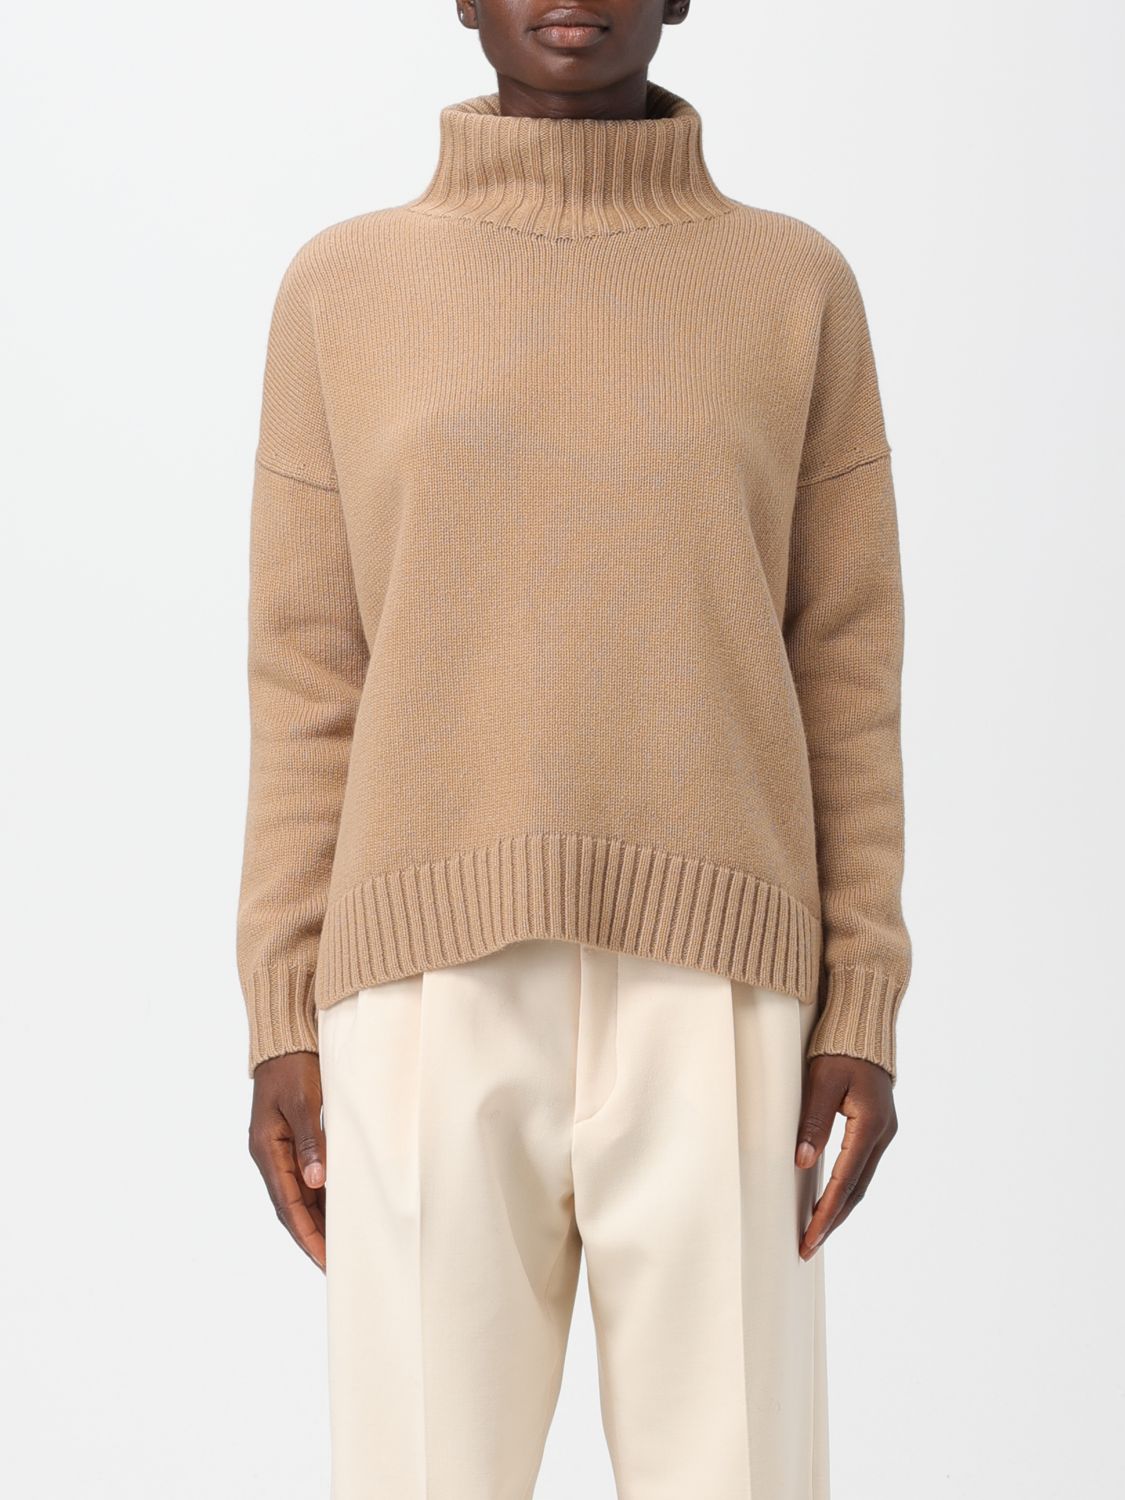 MAX MARA SWEATER IN WOOL AND CASHMERE BLEND,393057042